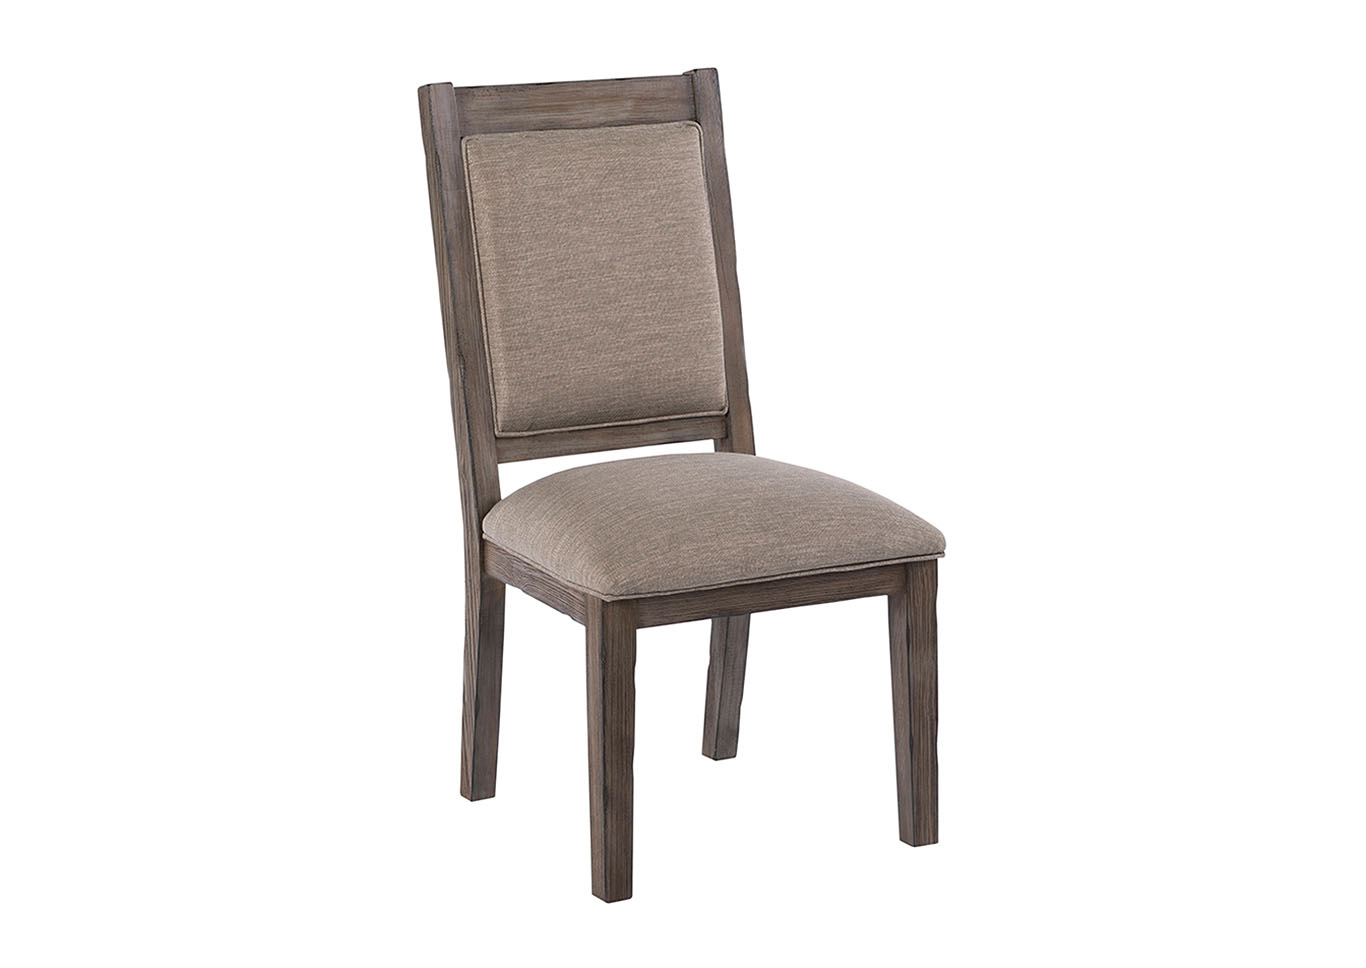 Foundry Driftwood Upholstered Side Chair (Set of 2),Kincaid